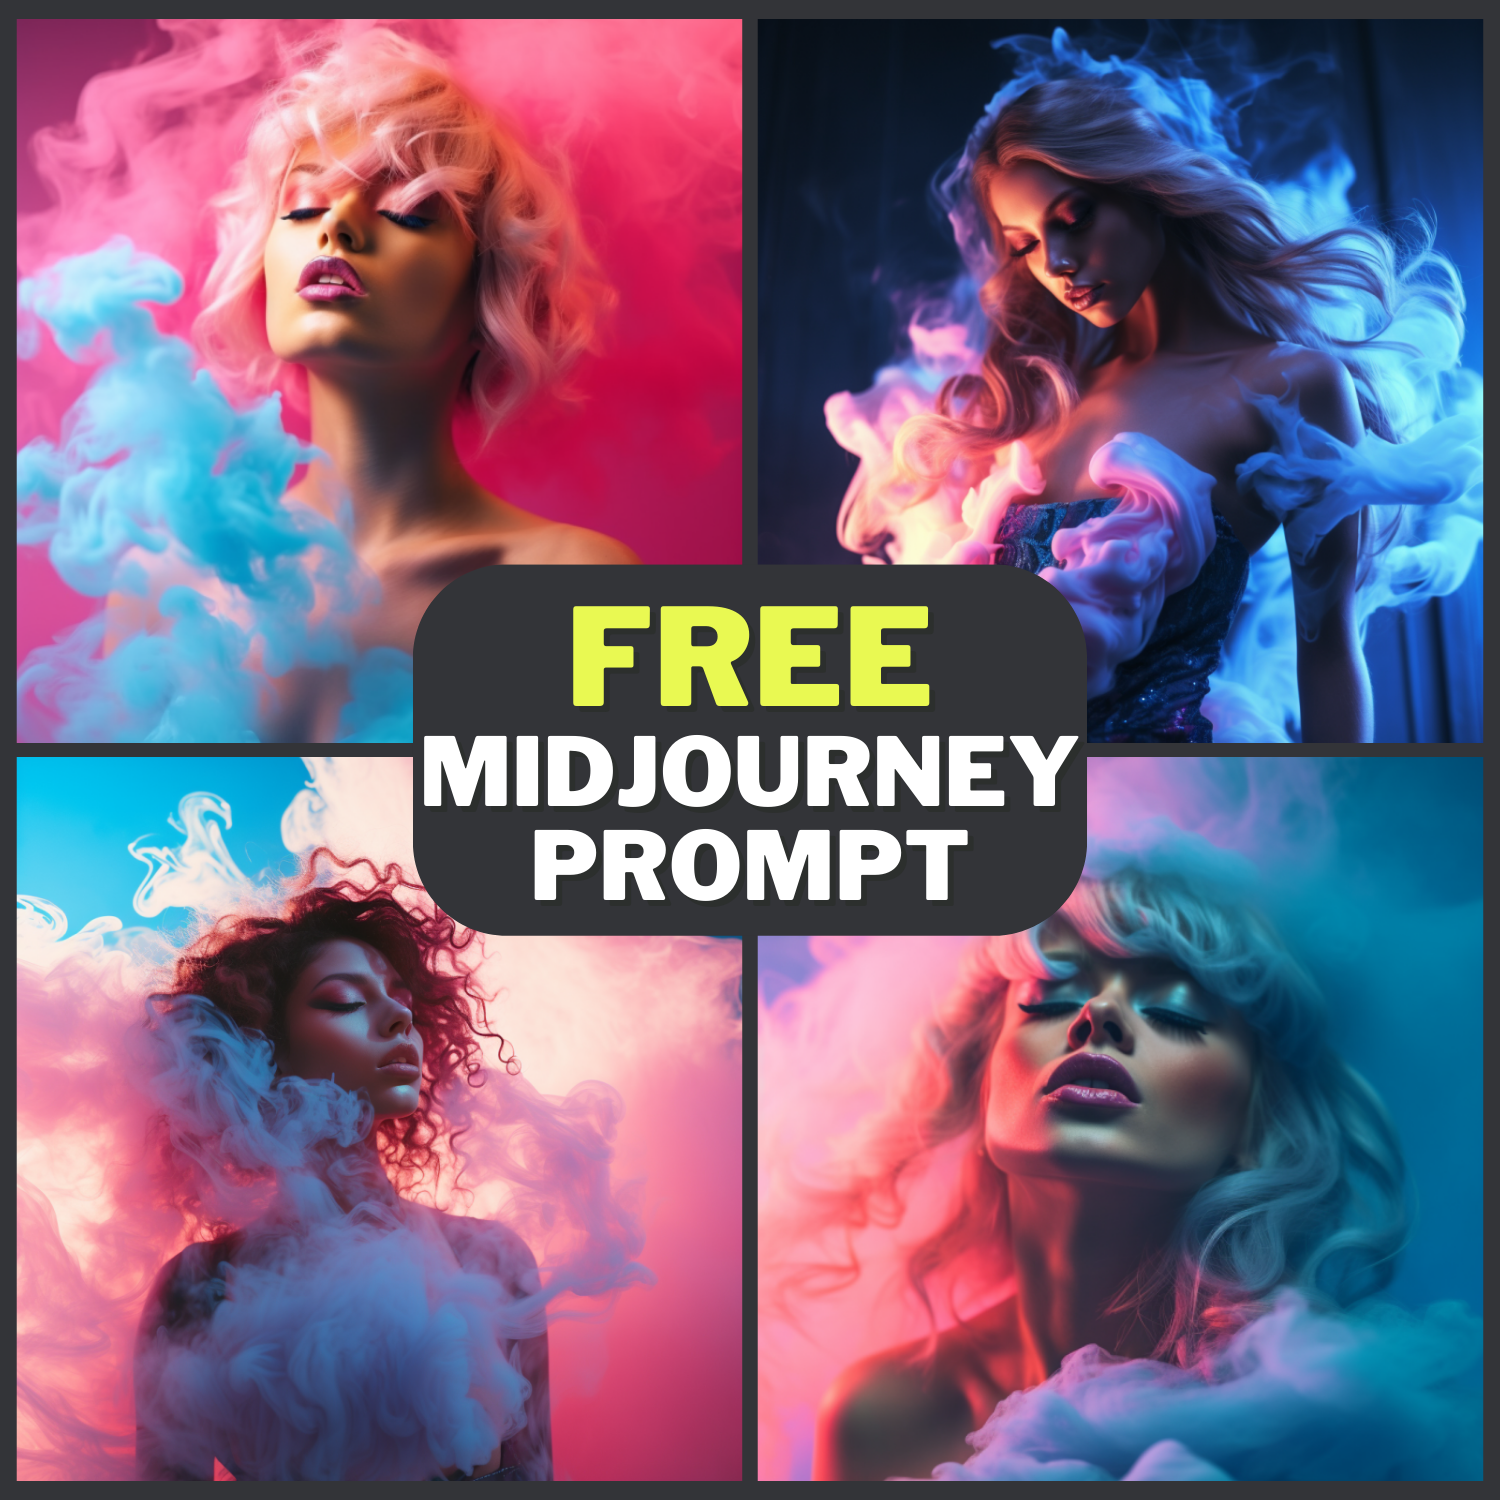 Woman With Smoke Free Midjourney Prompt 1